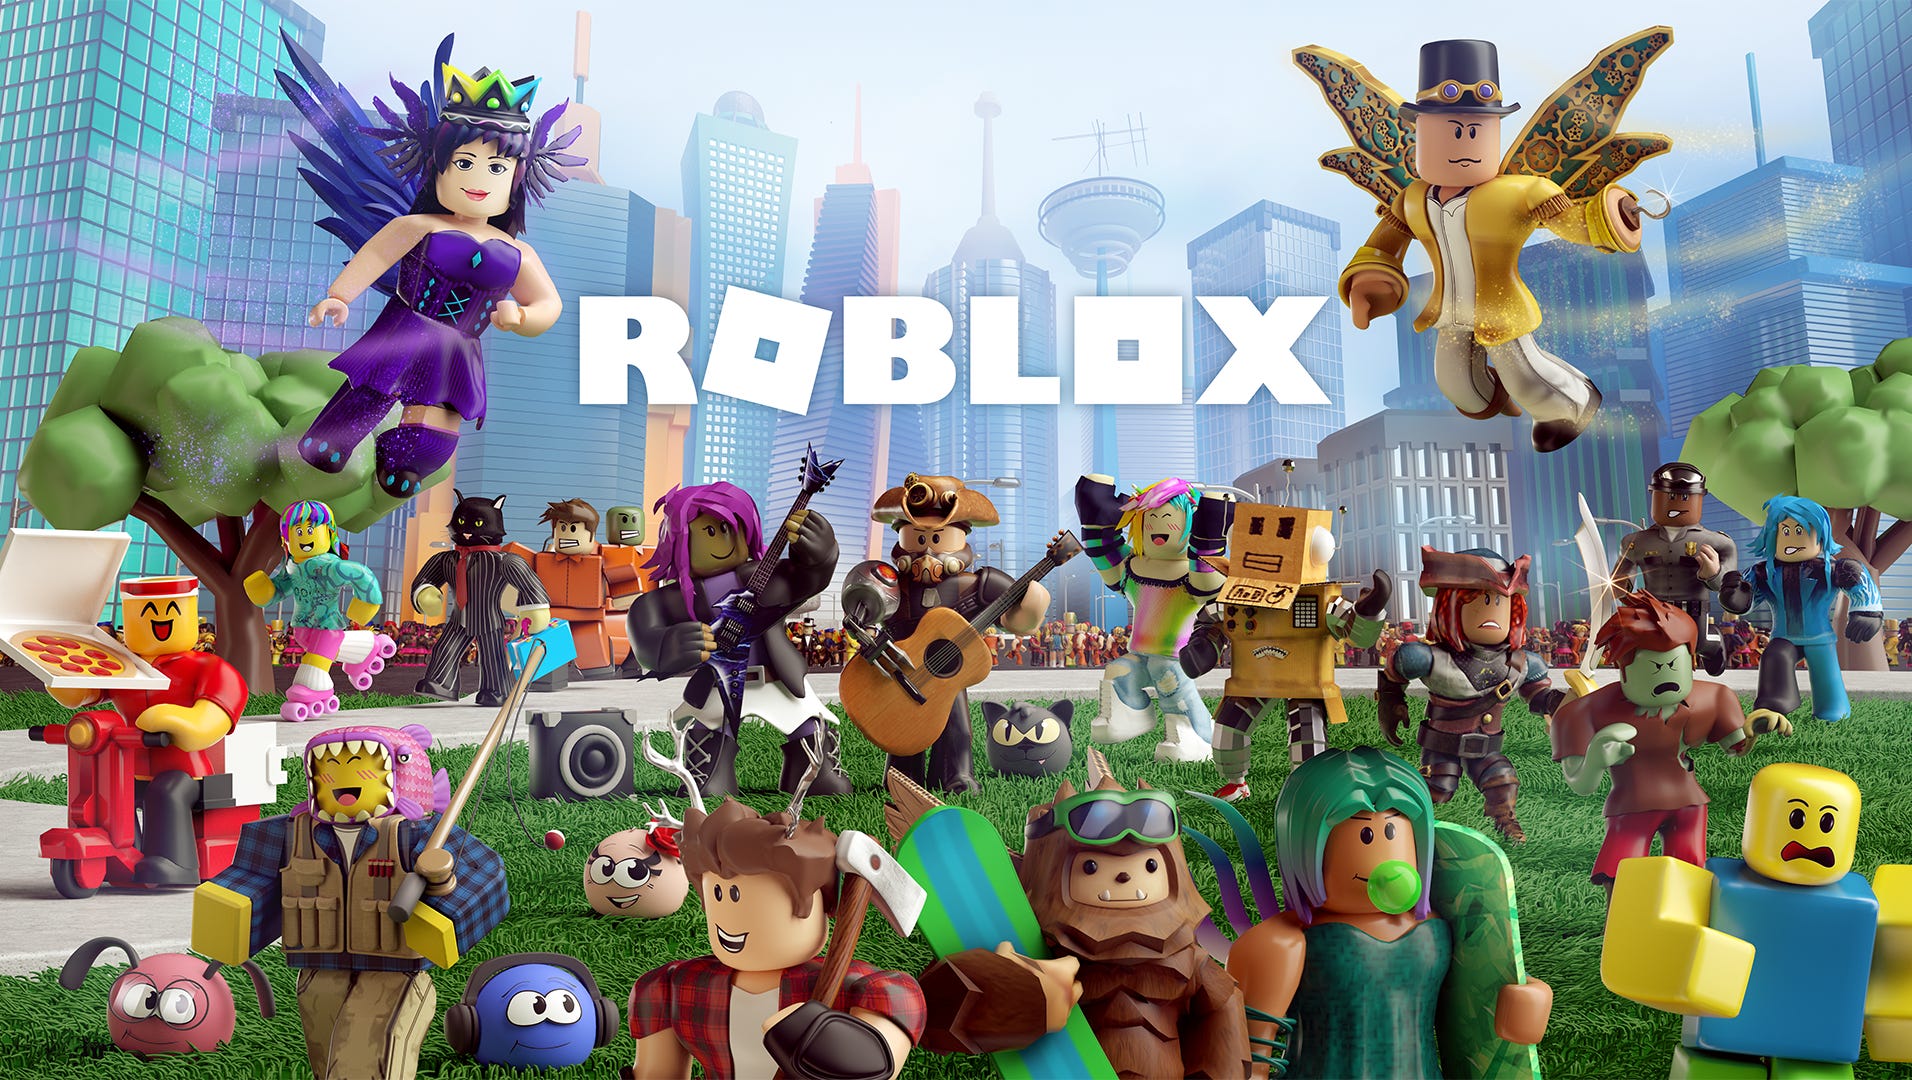 Roblox Kids Game Shows Character Being Sexually Violated Mom Warns - pictures of roblox characters in one picture